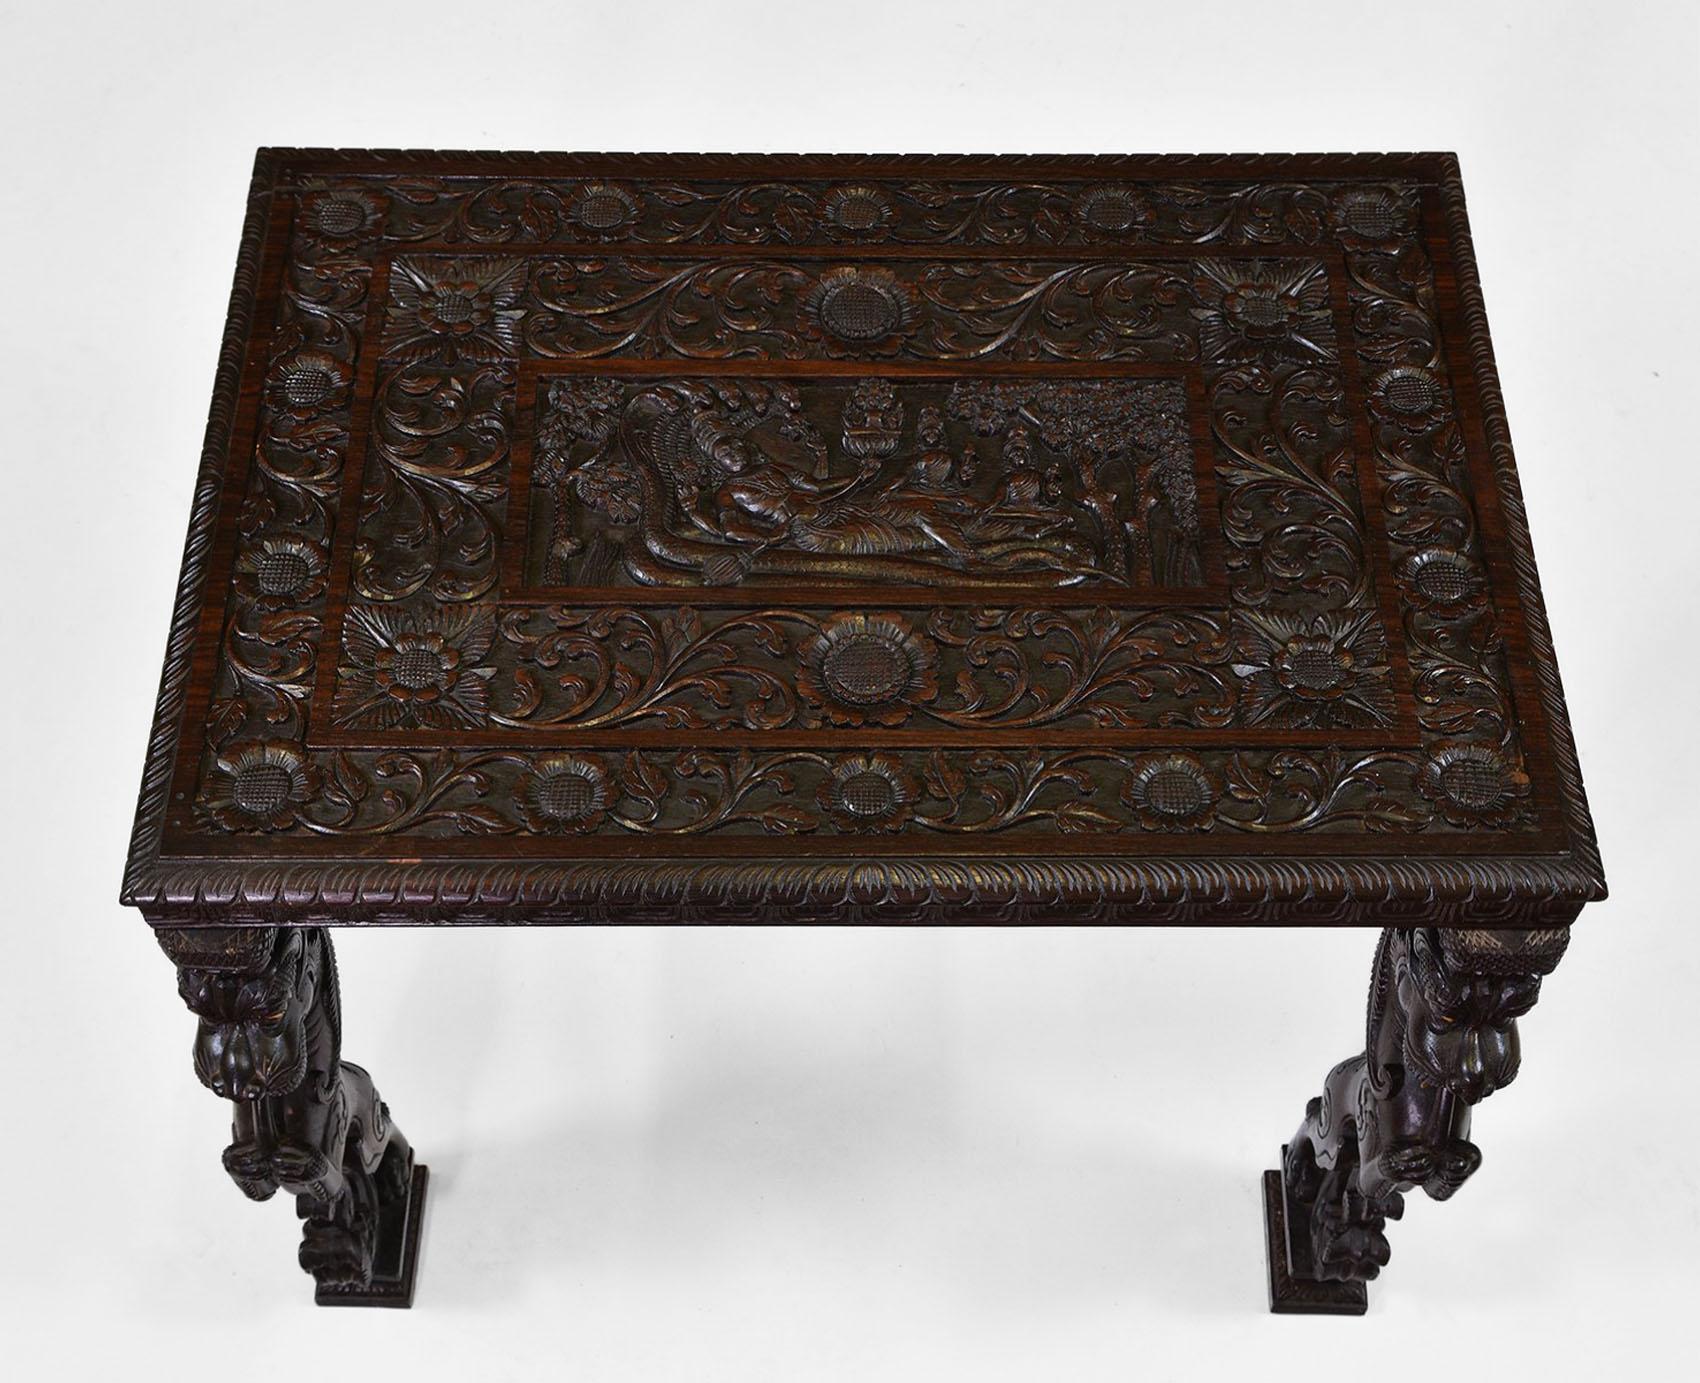 A wonderful profusely carved Padouk wood Anglo Indian occasional table with mythical lions to each leg and bone fangs. It boasts intricate floral decoration and carved top depicting Vishnu. Circa 1900.

The table has been waxed. The legs screw on,